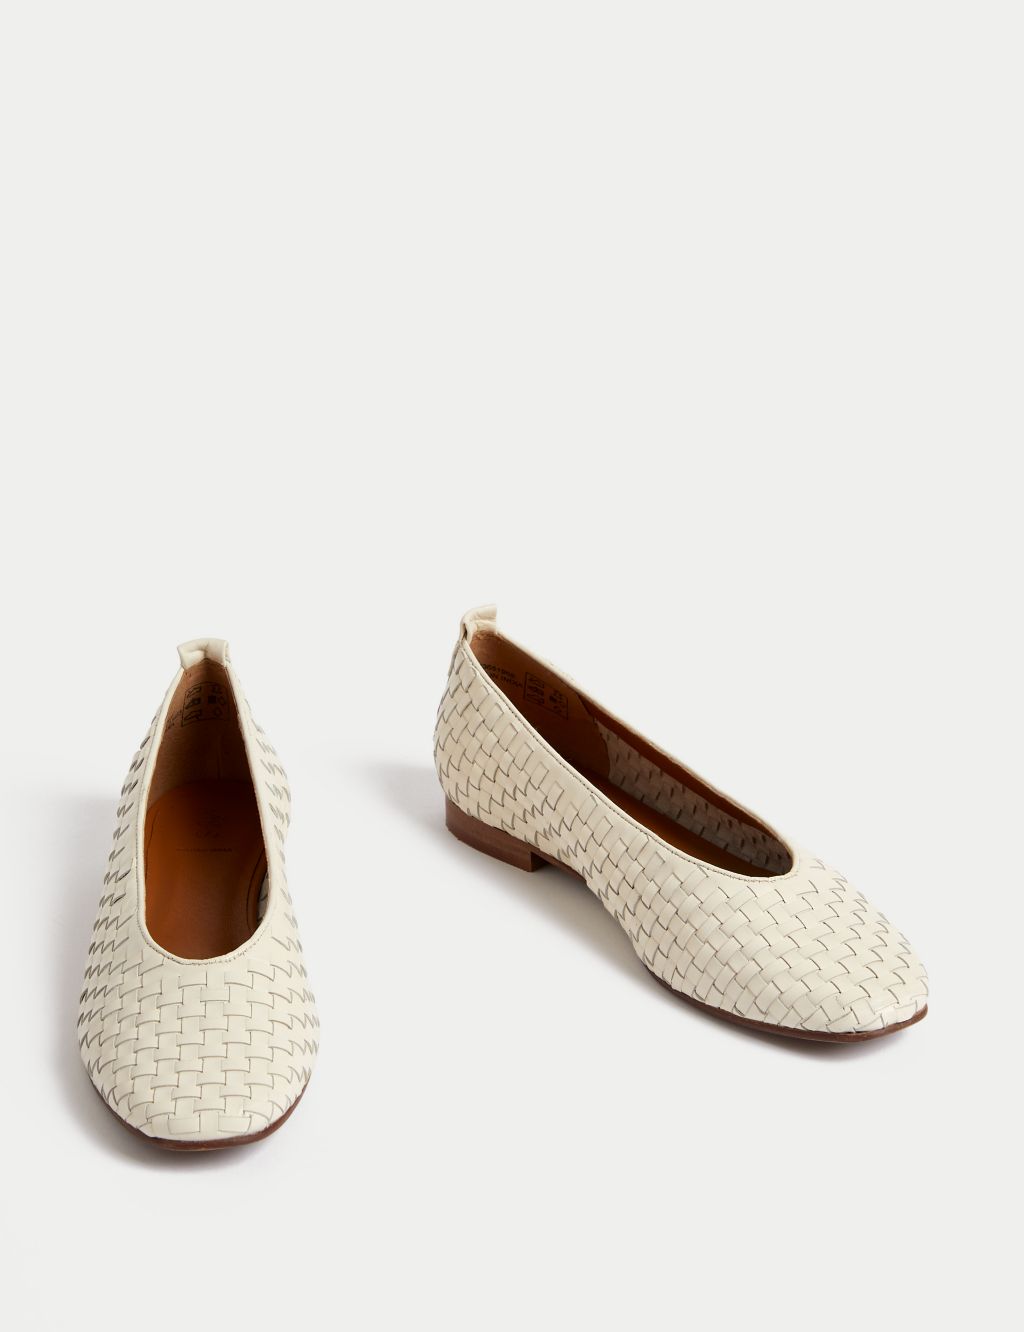 Leather Woven Flat Ballet Pumps 1 of 3